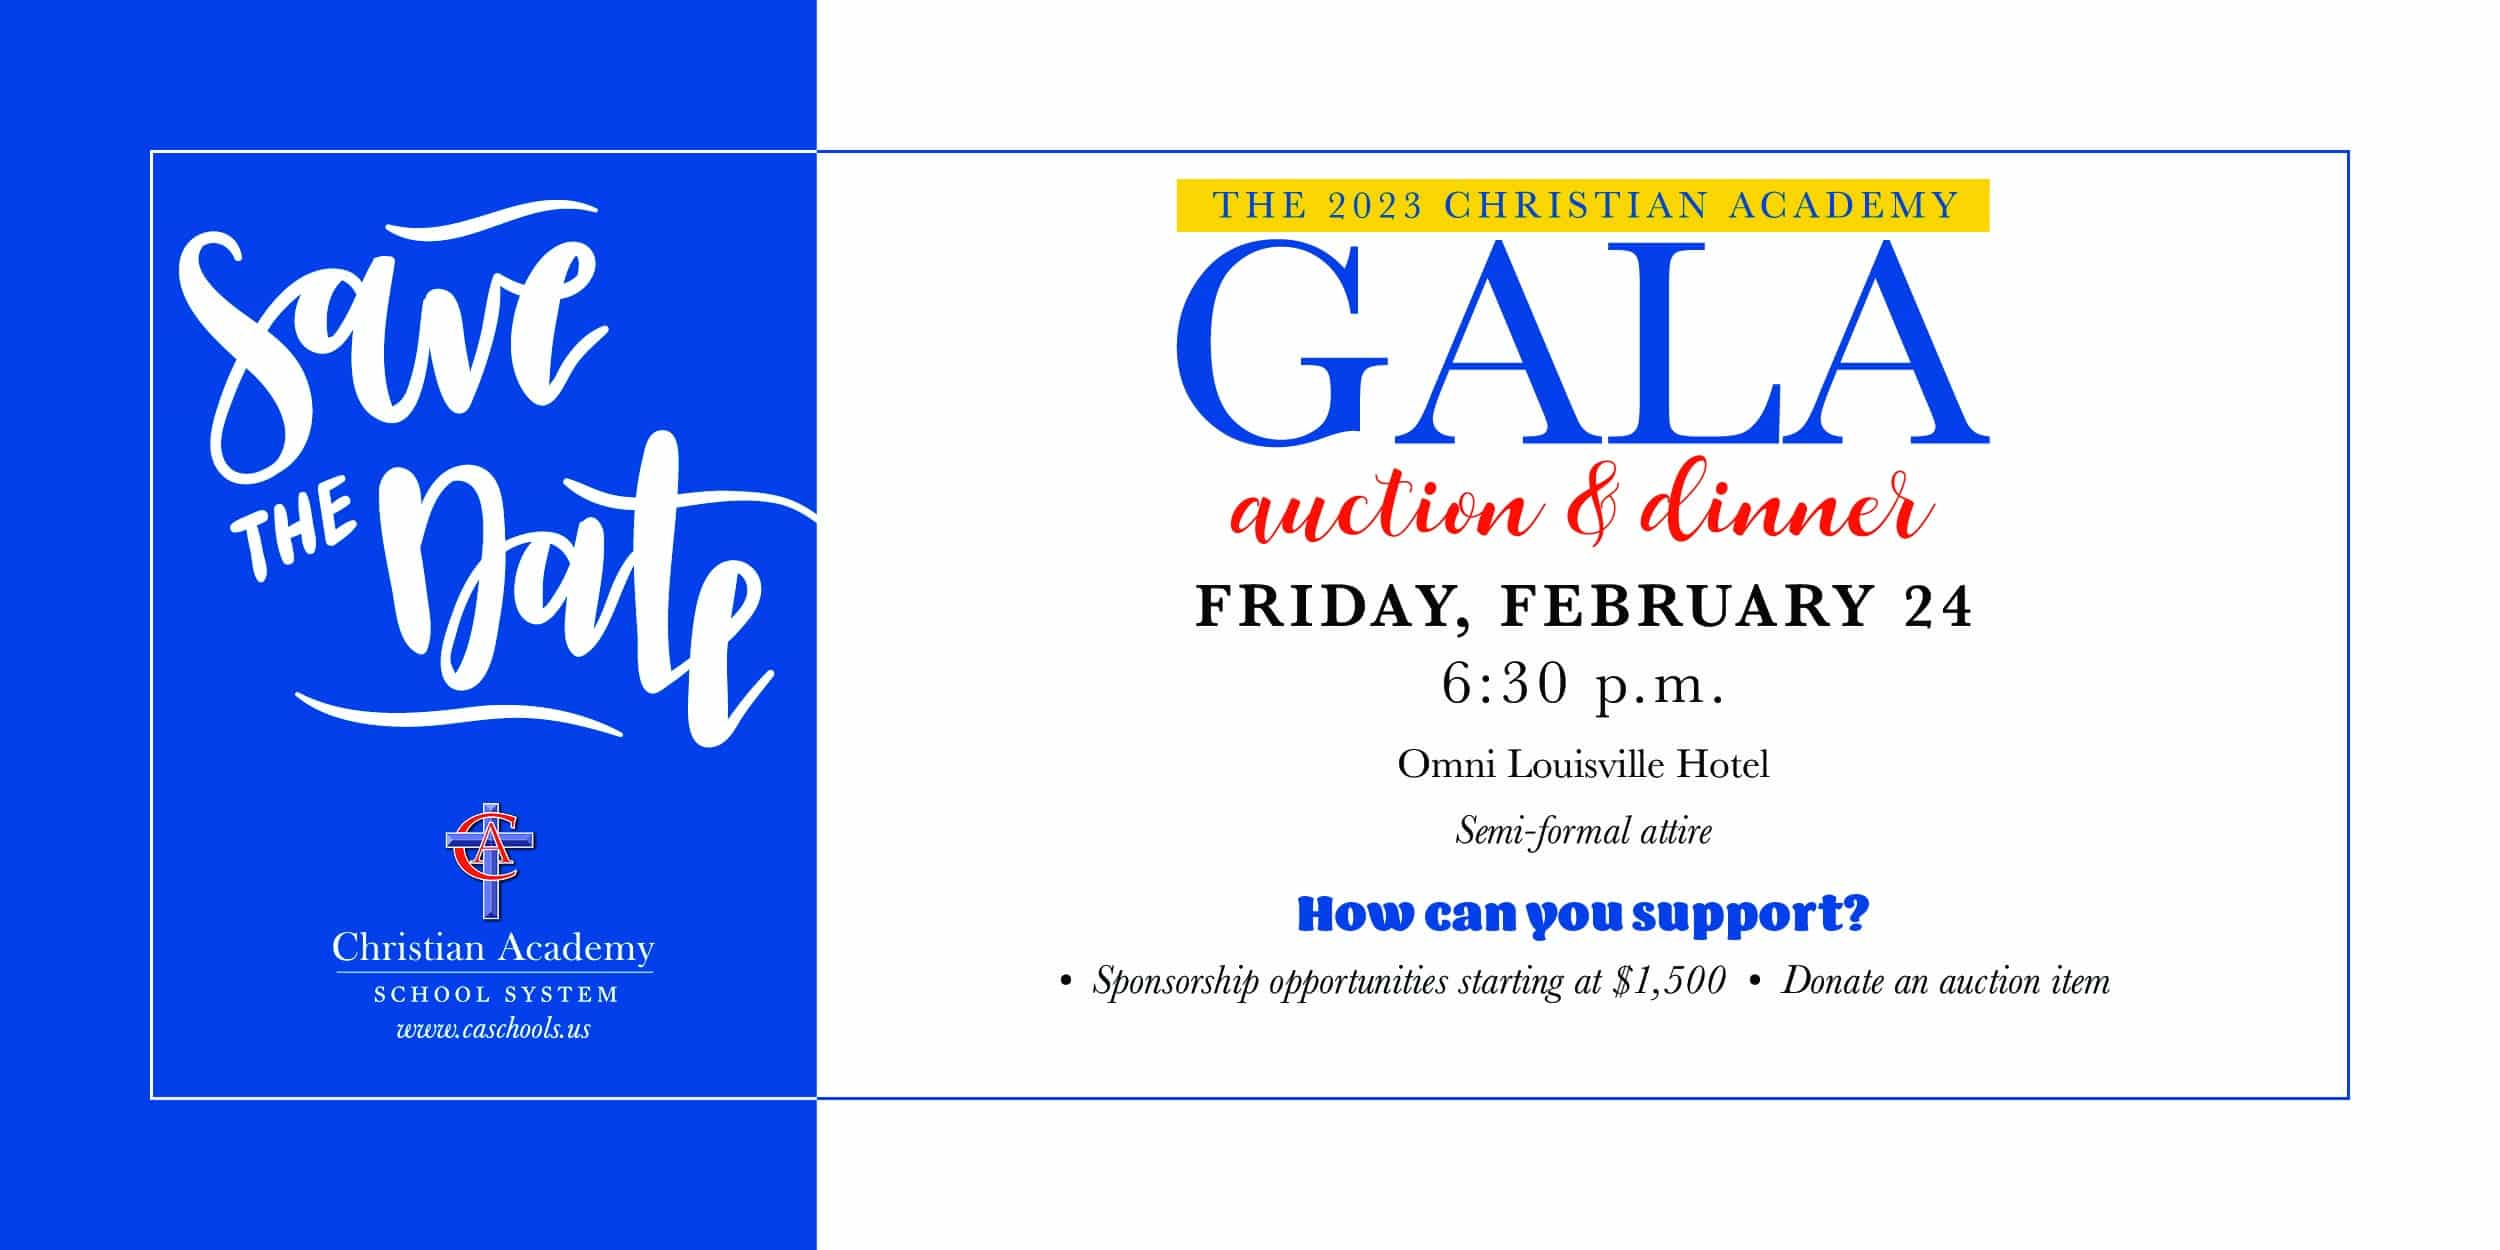 Christian Academy School System | Support | 2023 Gala Save the Date | February 24